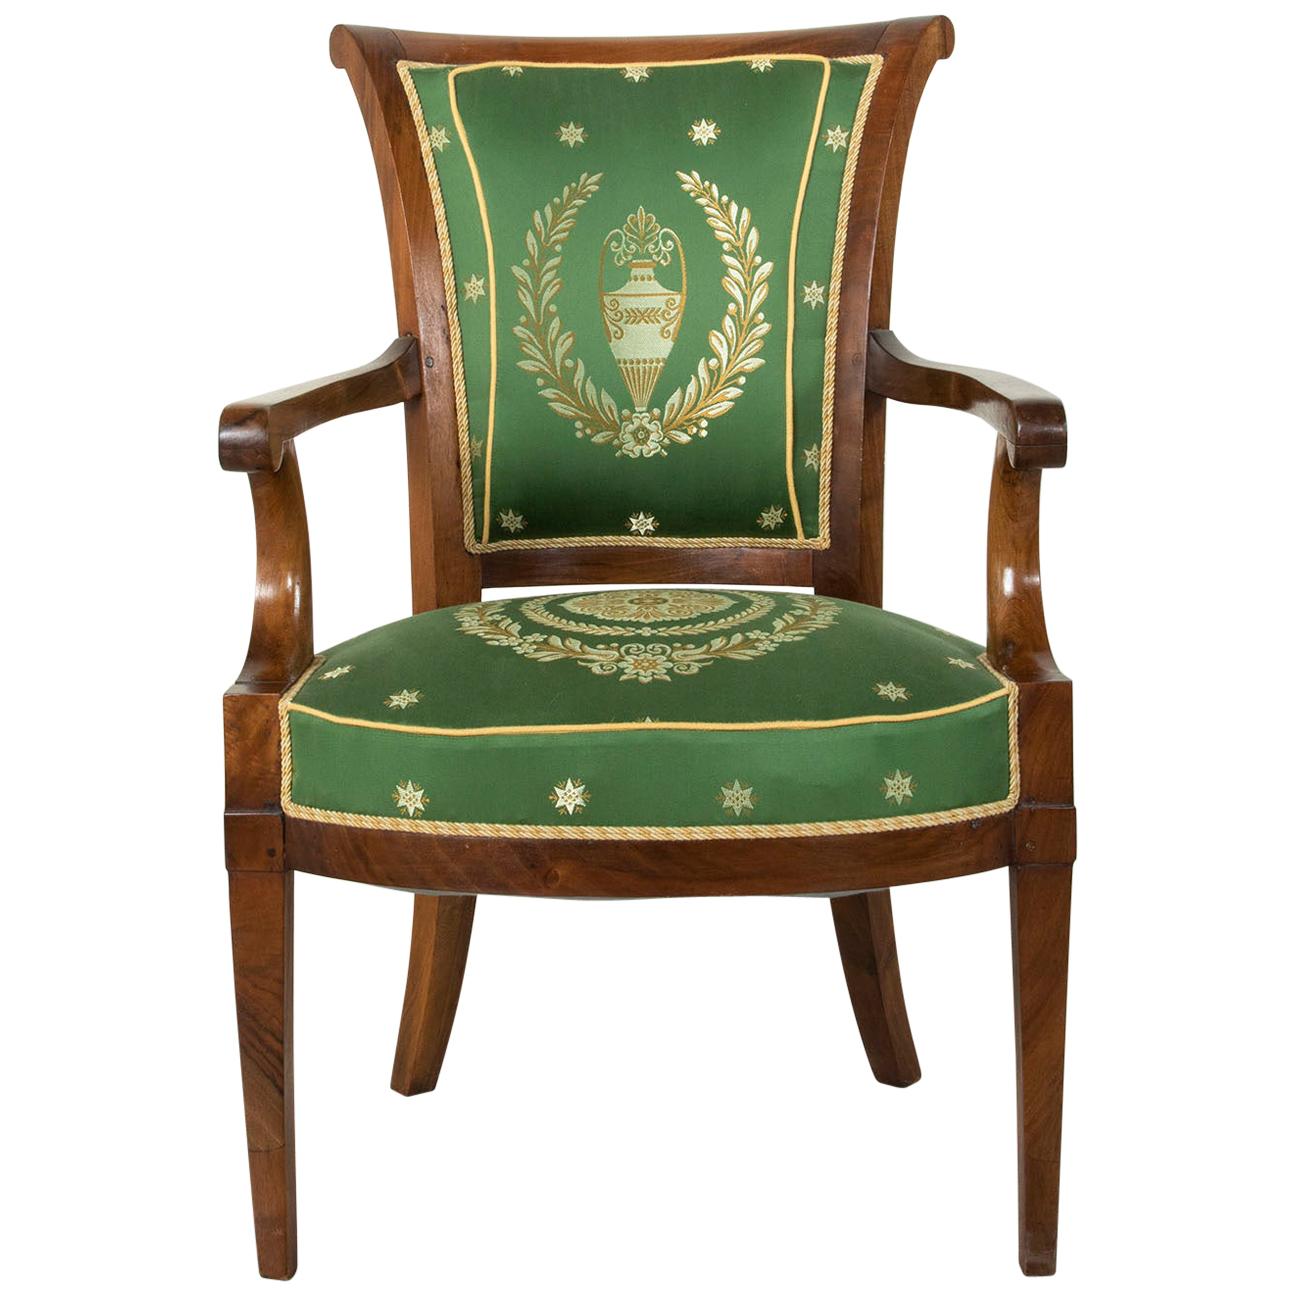 Late 18th Century French Directoire Period Mahogany Armchair, Silk Upholstery